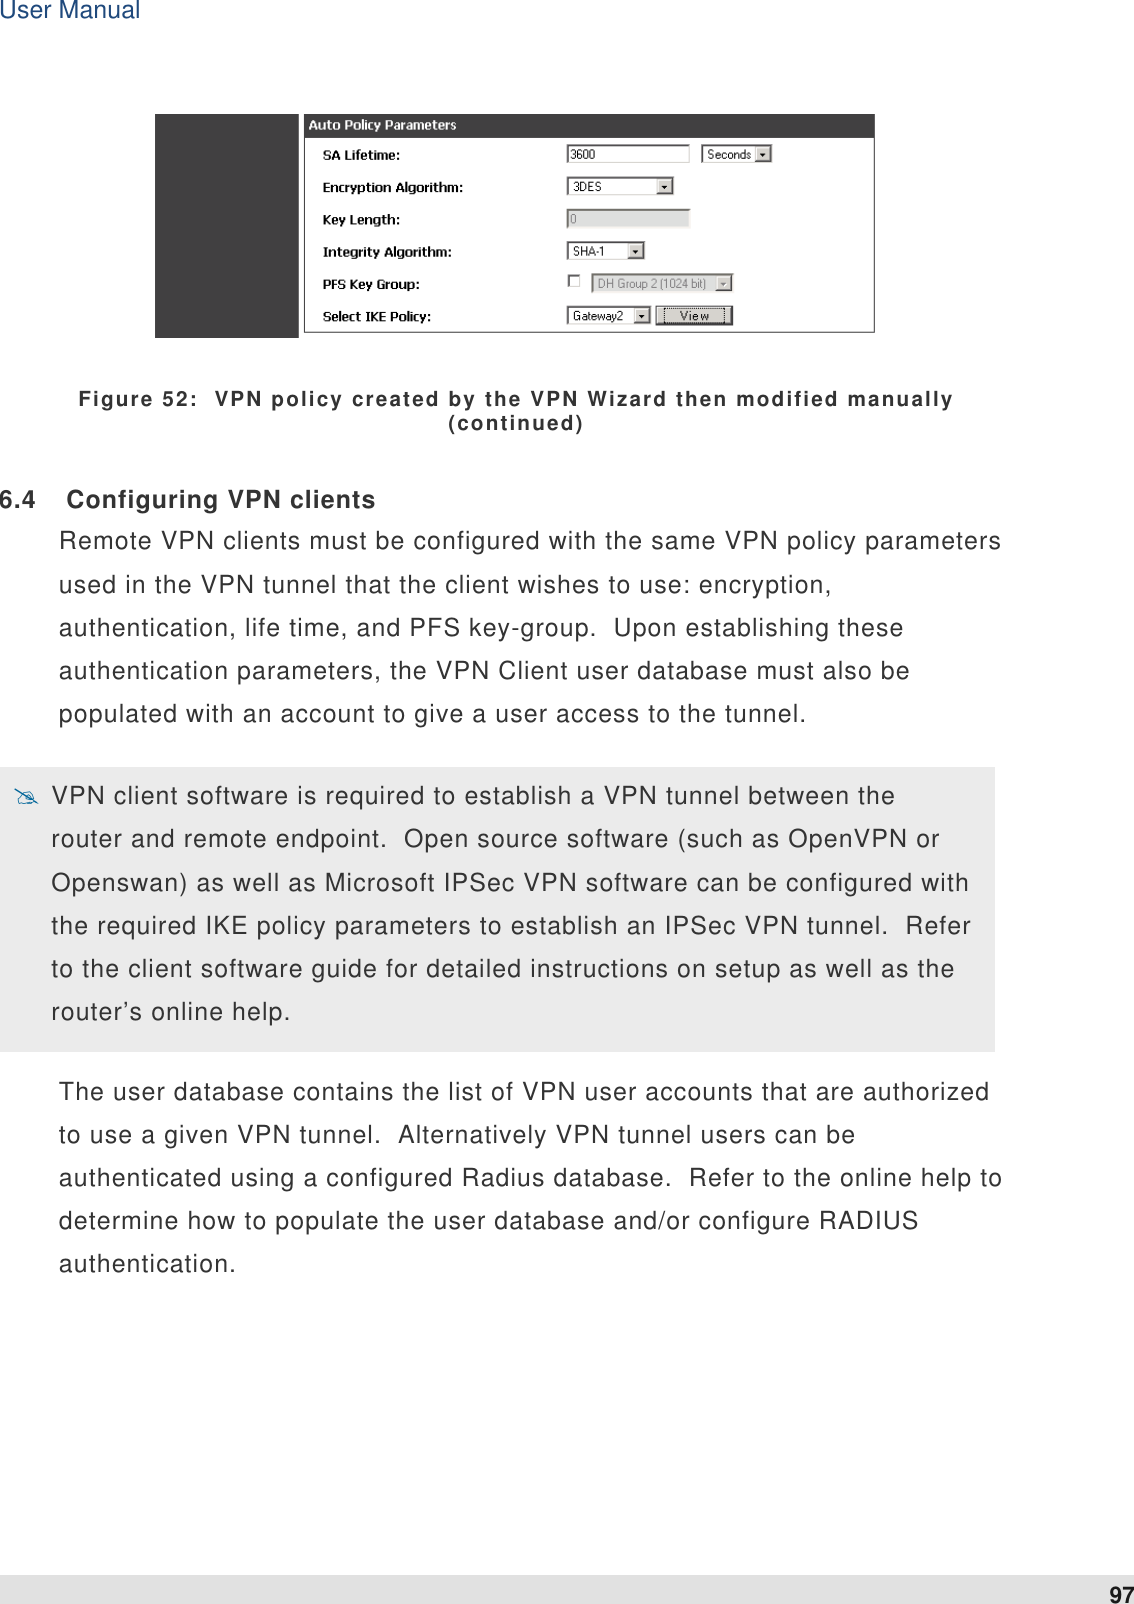 User Manual 97    Figure 52:  VPN policy created by the VPN Wizard then modified manually (continued) 6.4  Configuring VPN clients Remote VPN clients must be configured with the same VPN policy parameters used in the VPN tunnel that the client wishes to use: encryption, authentication, life time, and PFS key-group.  Upon establishing these authentication parameters, the VPN Client user database must also be populated with an account to give a user access to the tunnel.    VPN client software is required to establish a VPN tunnel between the router and remote endpoint.  Open source software (such as OpenVPN or Openswan) as well as Microsoft IPSec VPN software can be configured with the required IKE policy parameters to establish an IPSec VPN tunnel.  Refer to the client software guide for detailed instructions on setup as well as the router’s online help.  The user database contains the list of VPN user accounts that are authorized to use a given VPN tunnel.  Alternatively VPN tunnel users can be authenticated using a configured Radius database.  Refer to the online help to determine how to populate the user database and/or configure RADIUS authentication.  